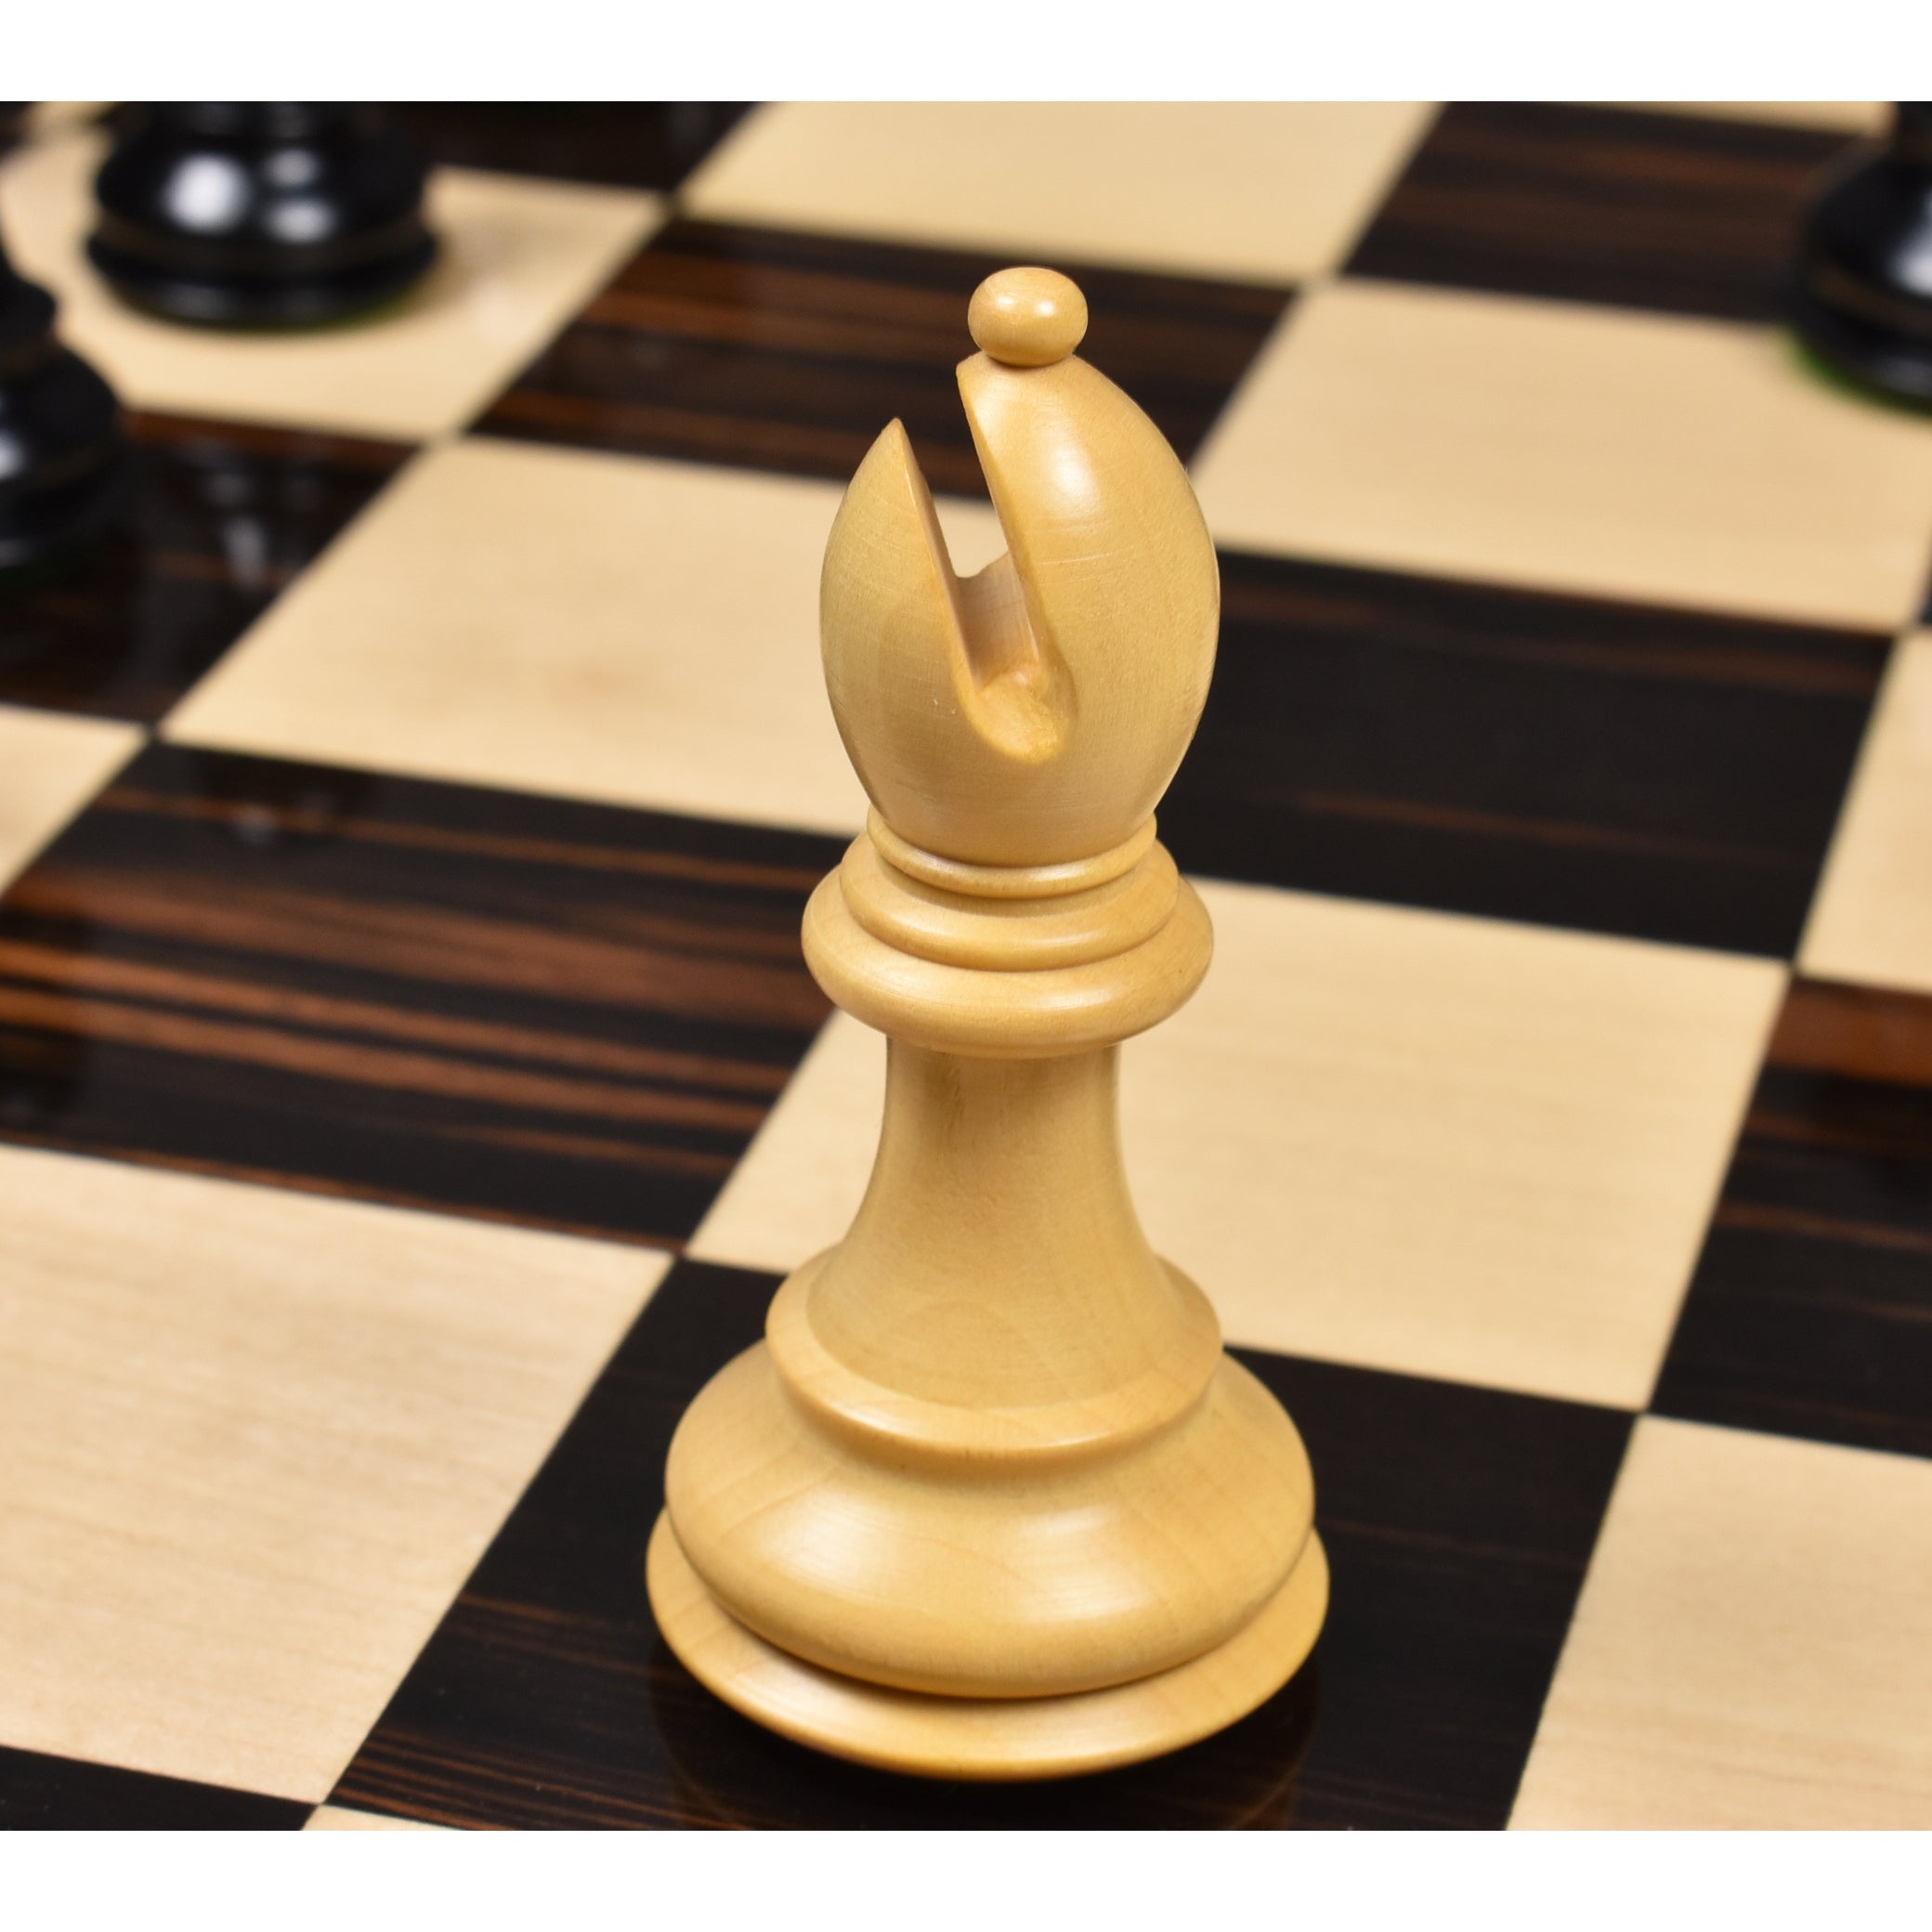 The Expert Series Chess Pieces - 3.75 King | House Of Staunton